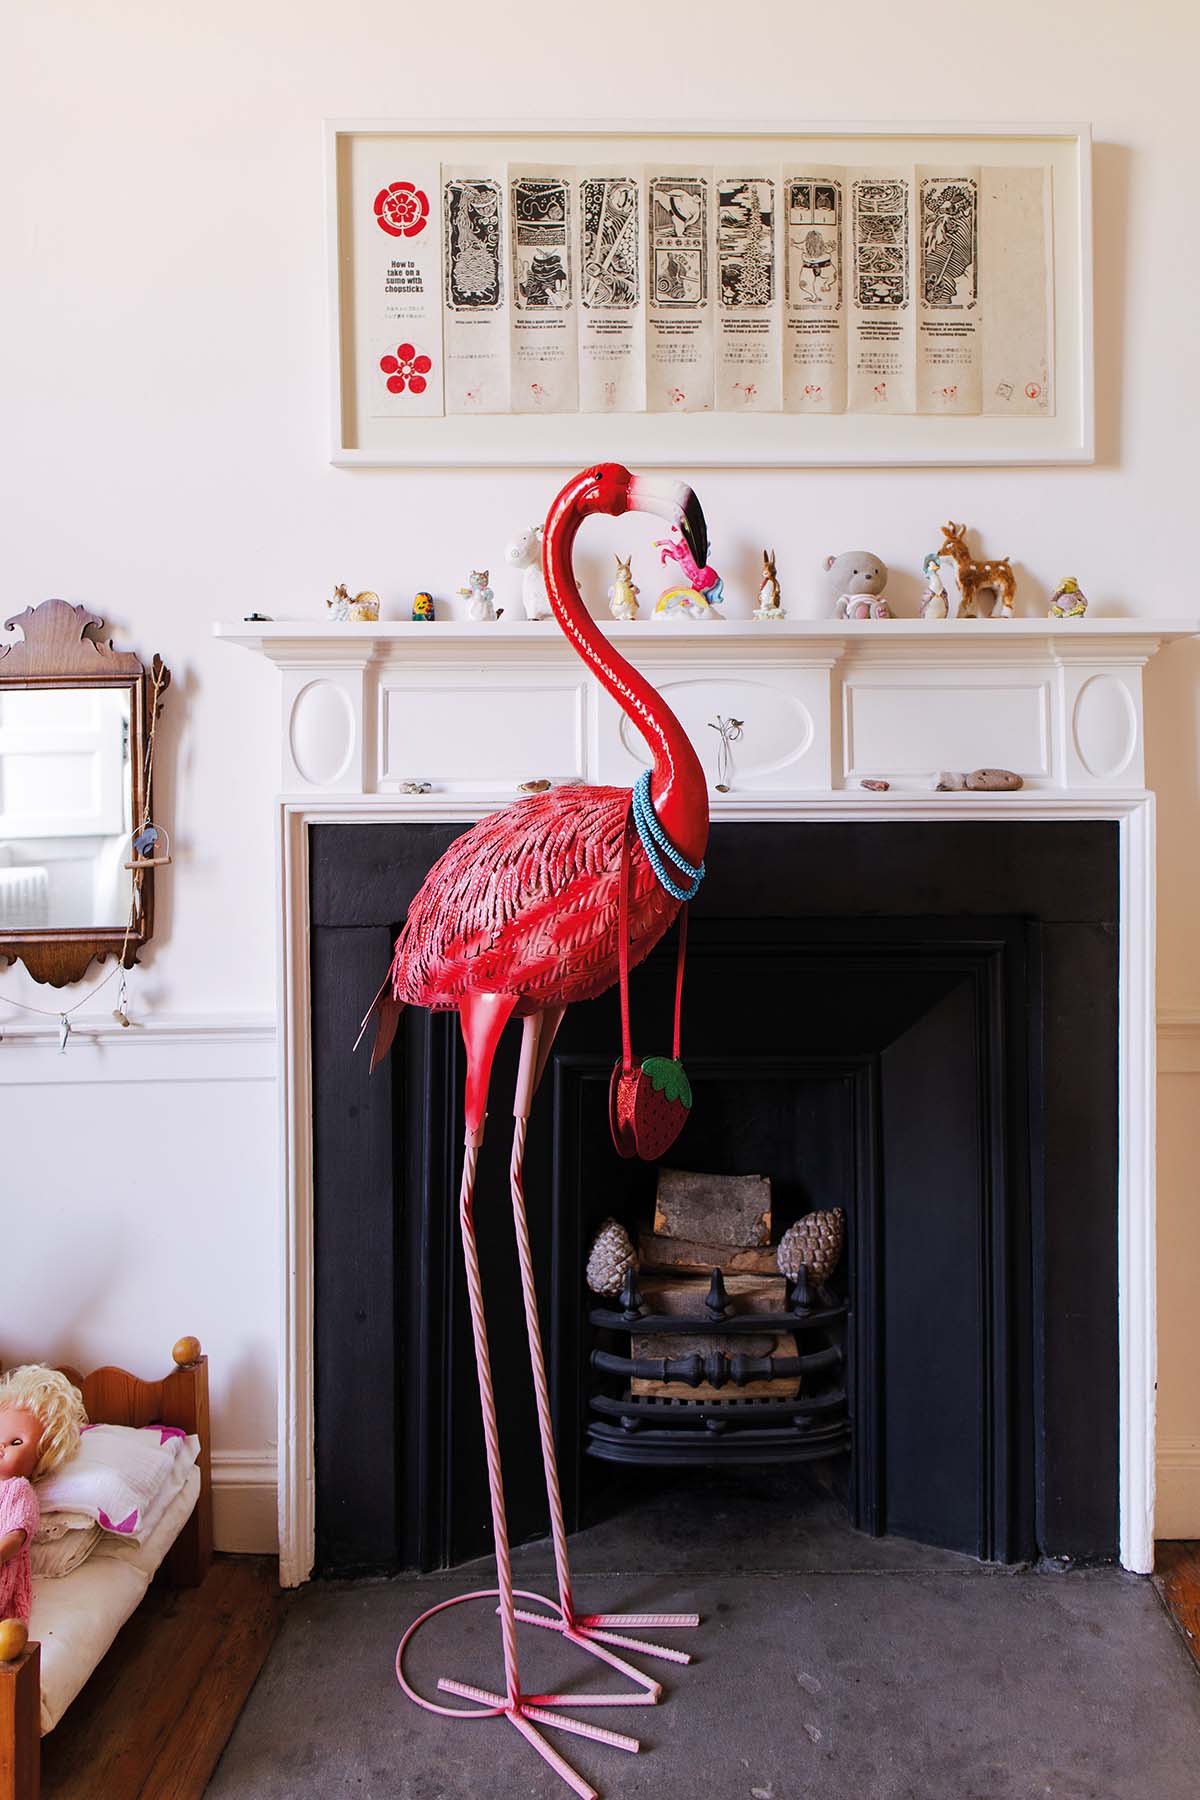 A large flamingo sculpture stands in a child's bedroom, in front of a fireplace